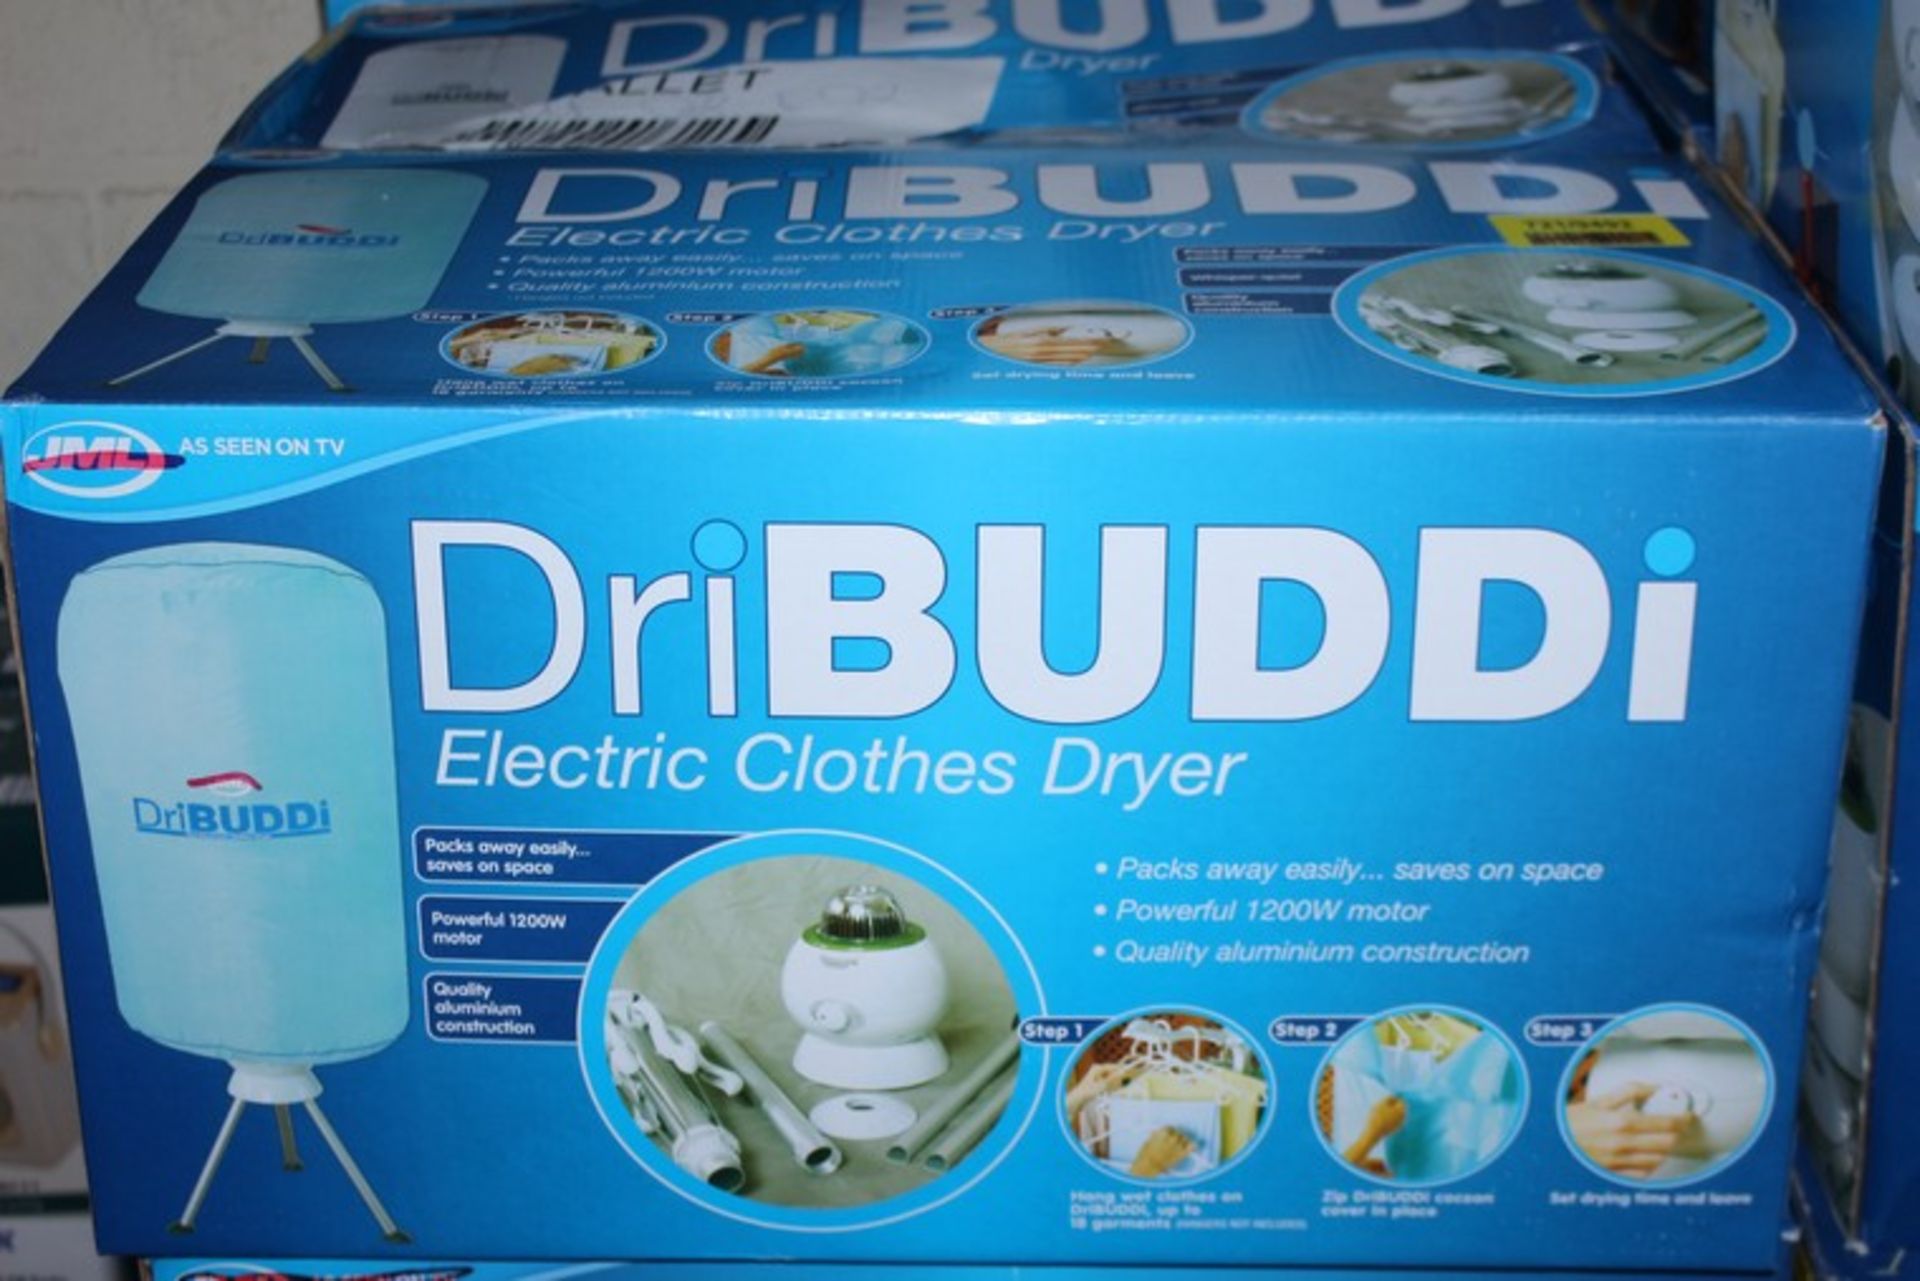 1 x BOXED AS SEEN ON TV DRY BUDDI ELECTRIC CLOTHES DRYER *PLEASE NOTE THAT THE BID PRICE IS